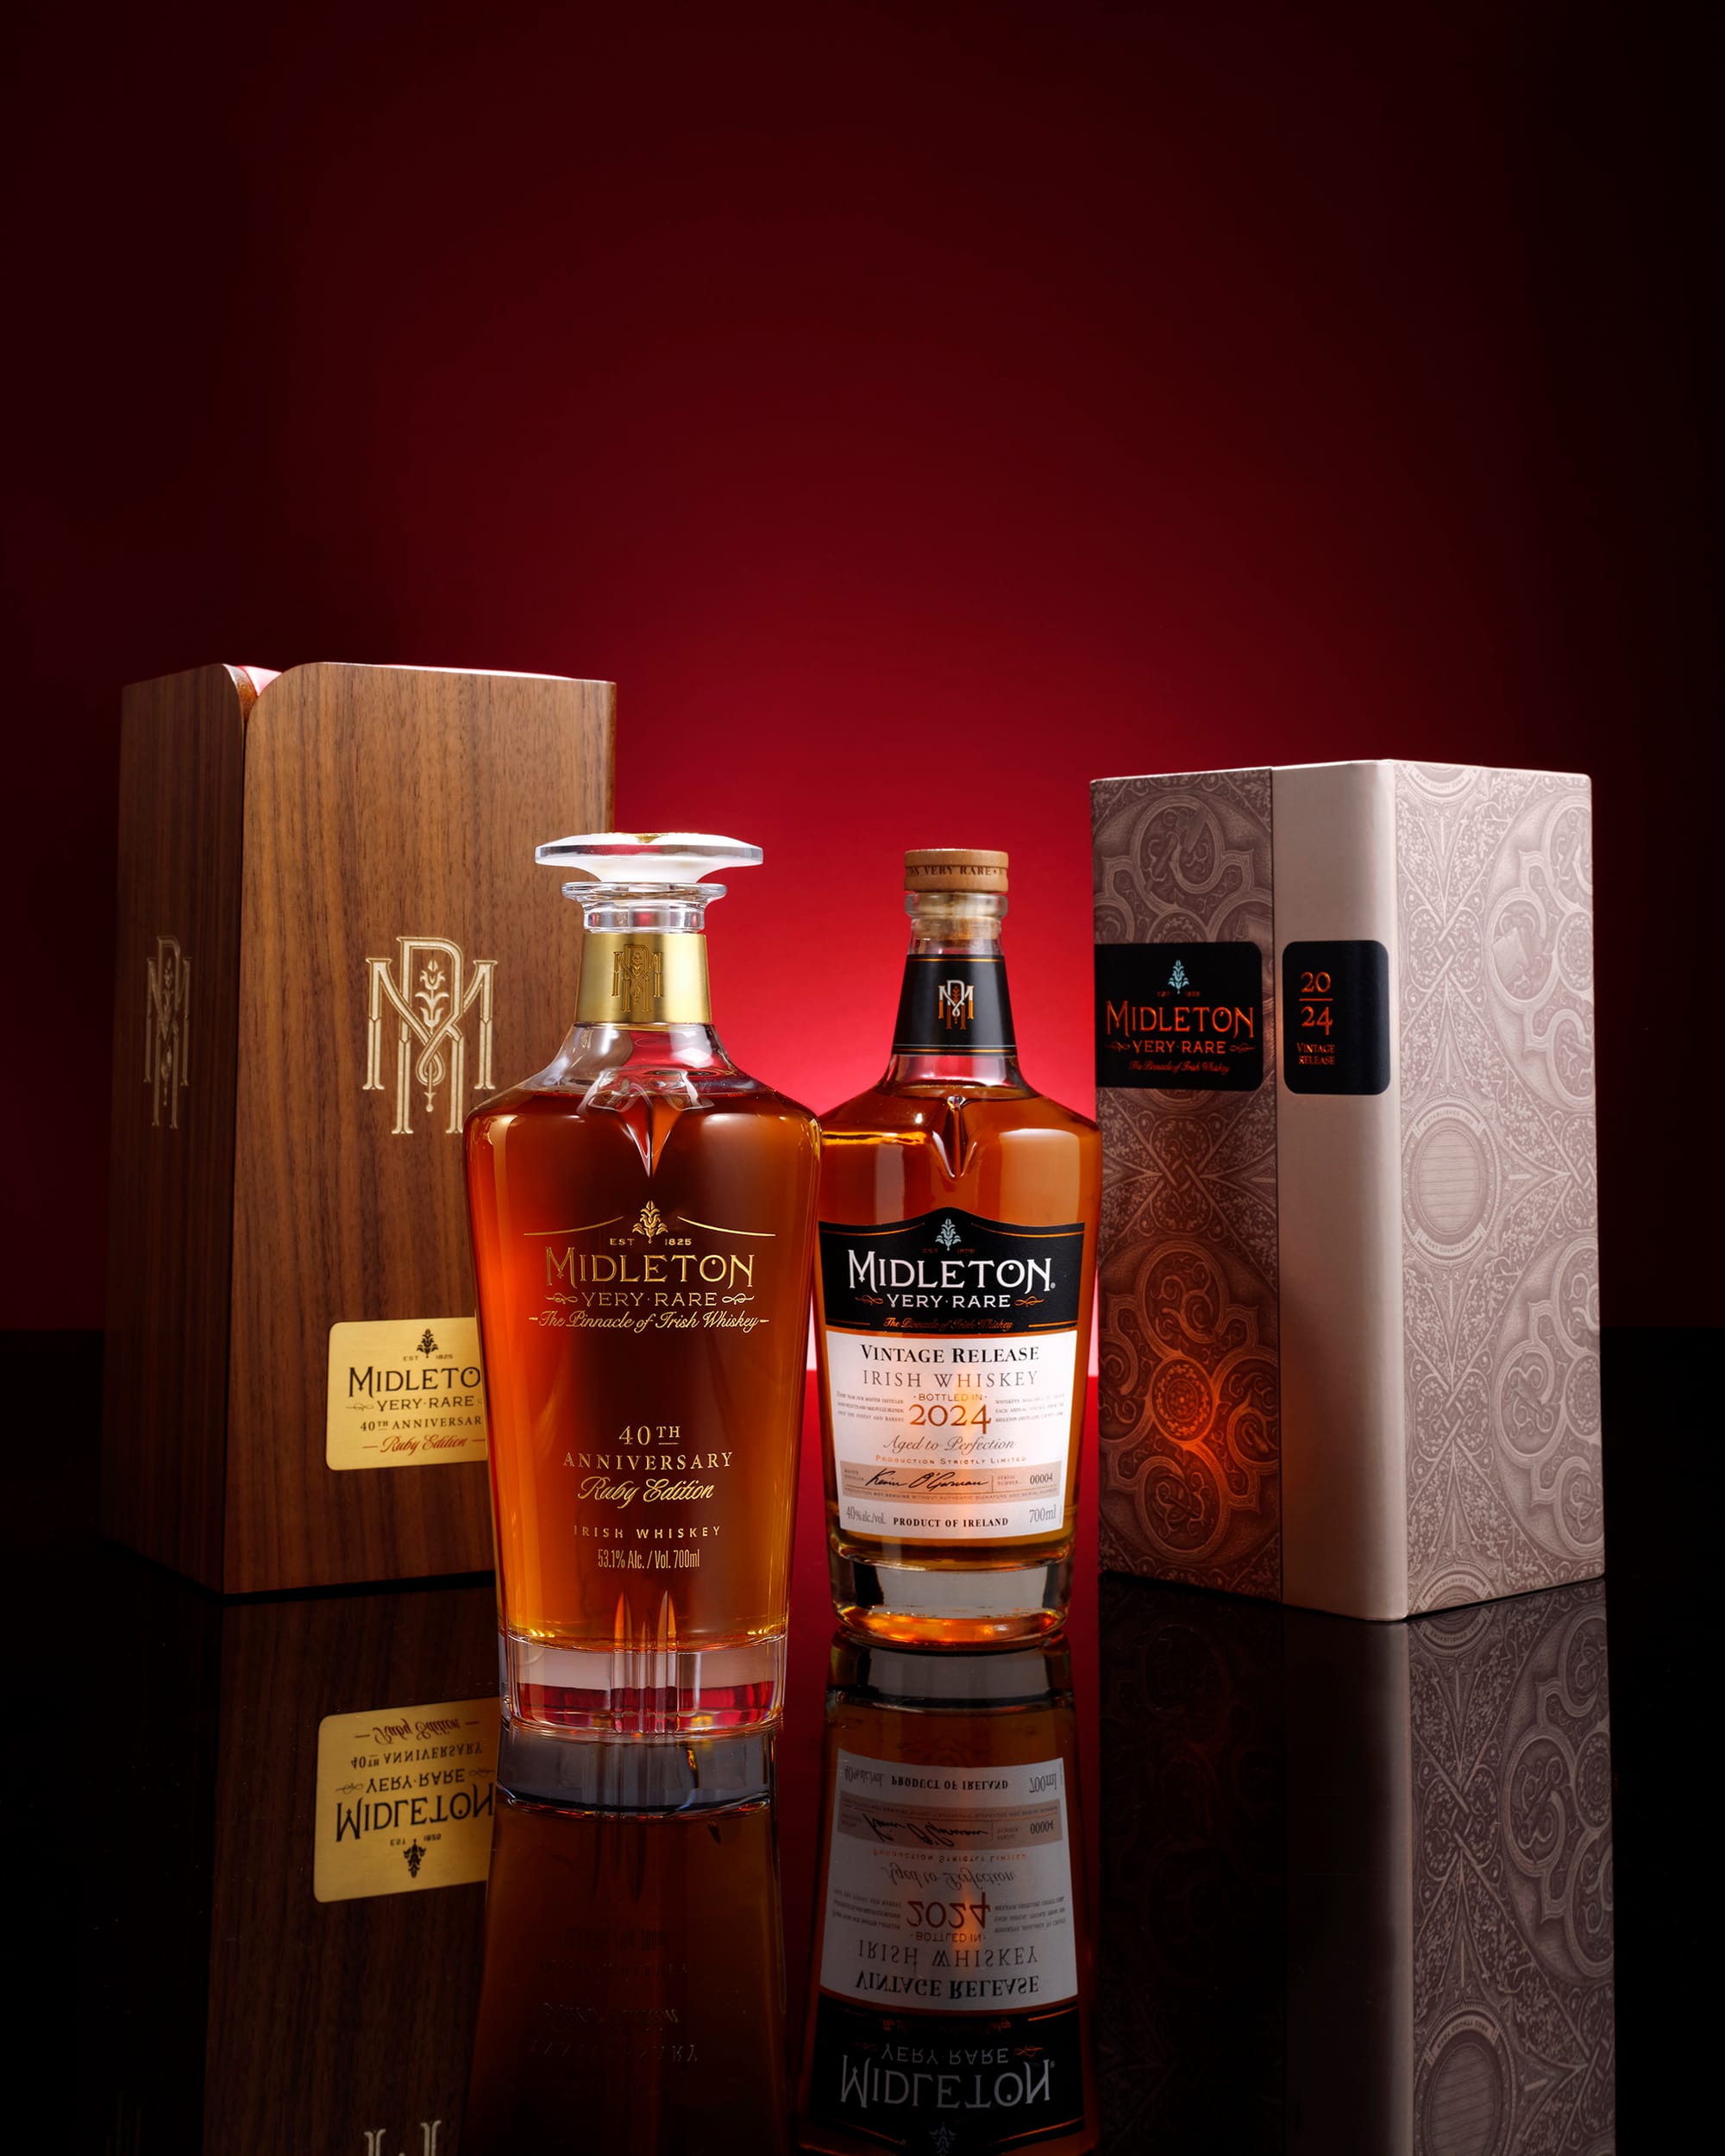 Midleton Very Rare 2024 Vintage Release Announced